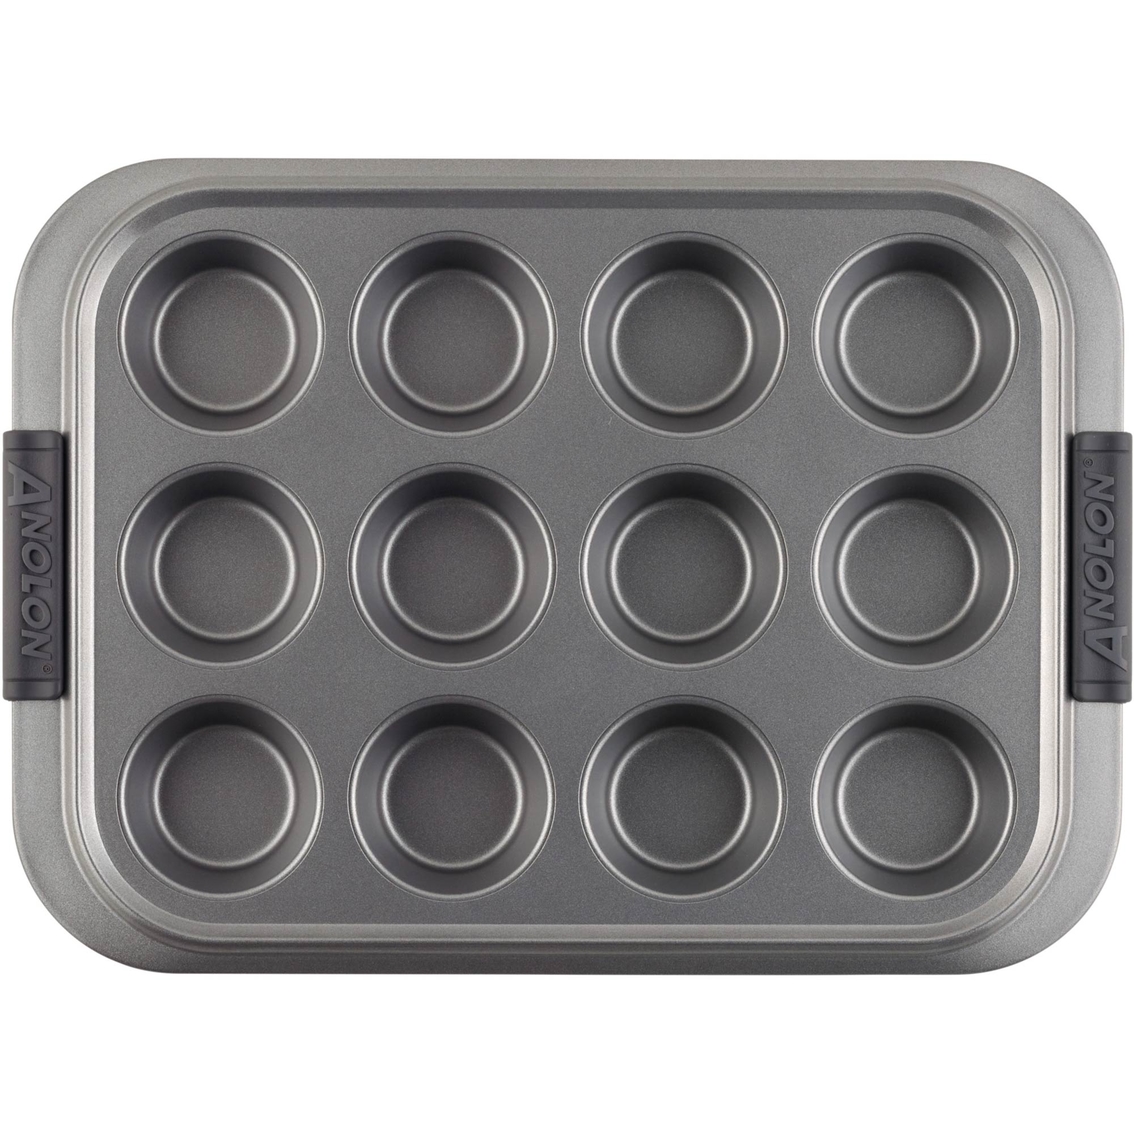 Anolon Advanced Nonstick Bakeware 12 Cup Silicone Grips Covered Muffin Pan - Image 3 of 4